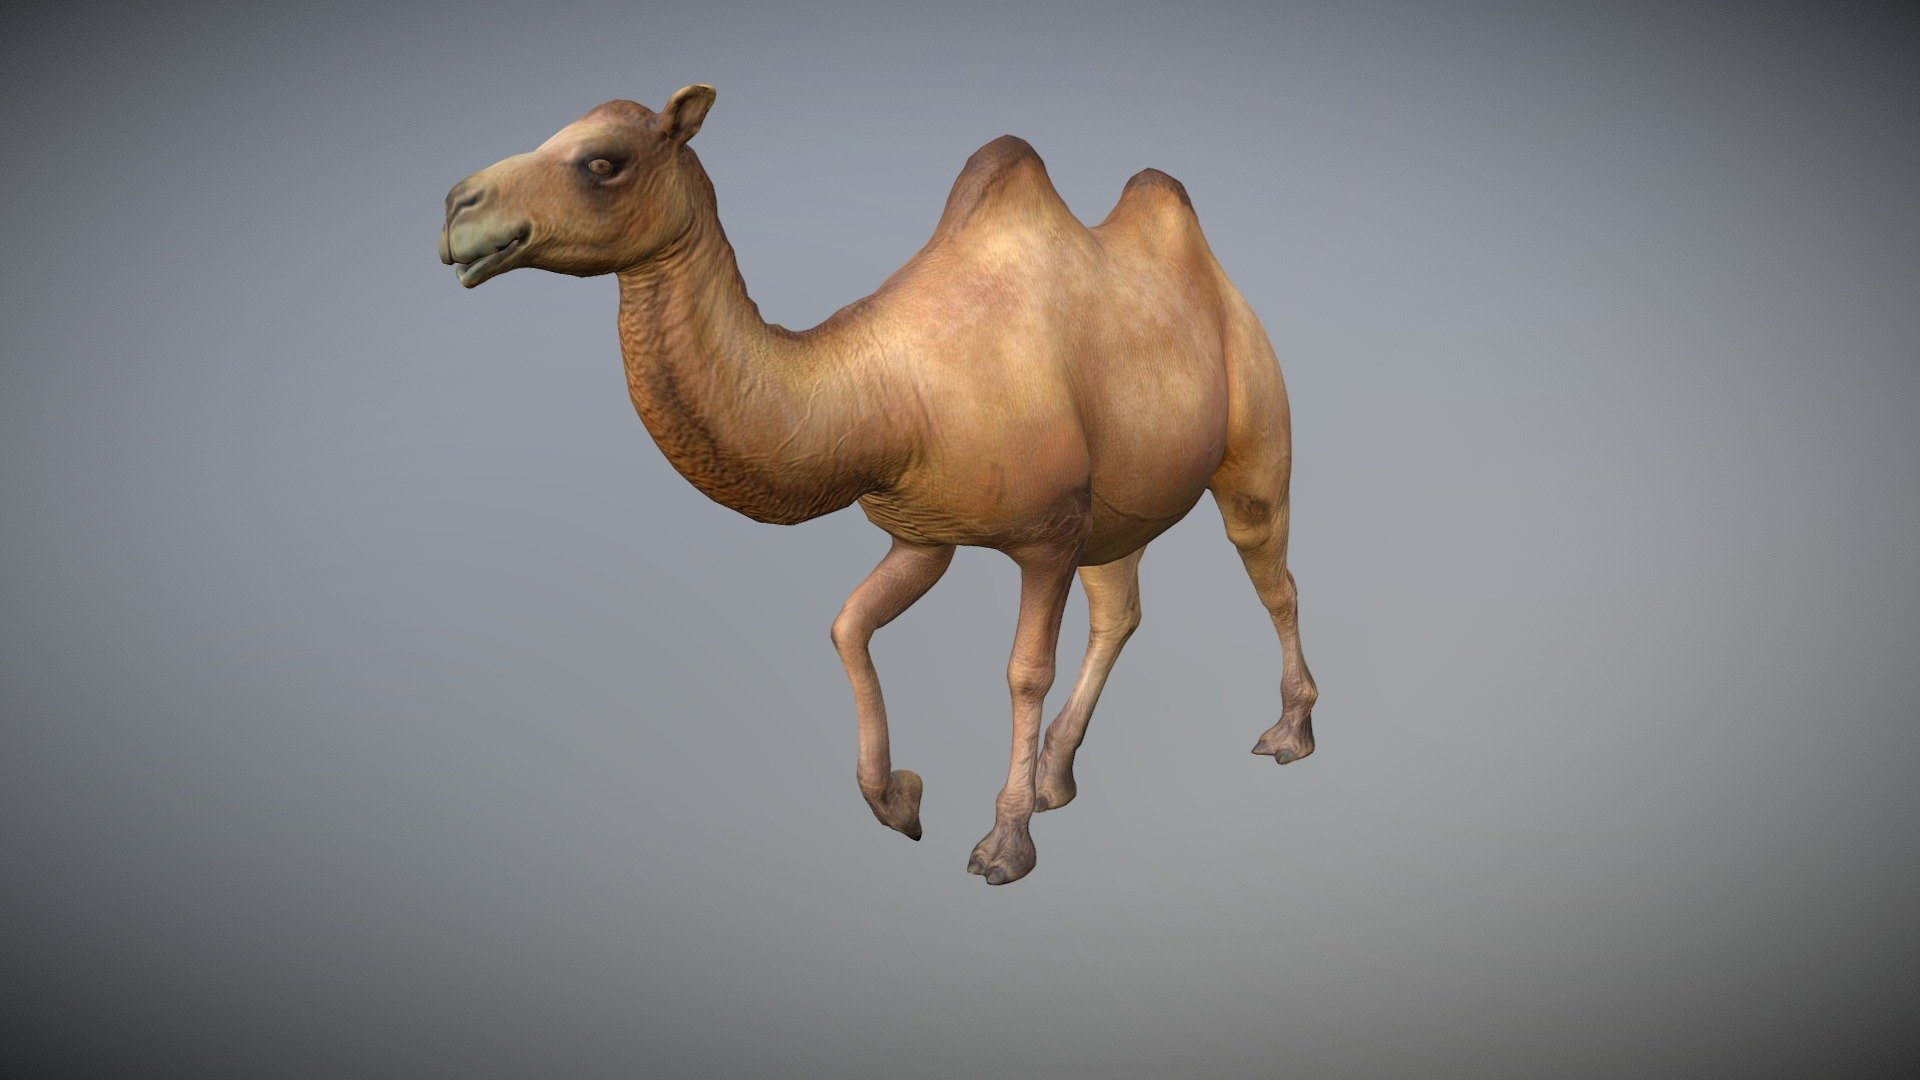 WATCH = https://youtu.be/mSUzZXBOfUo

Camel 3d Model

PACKAGE INCLUDE




High quality polygonal model, correctly scaled for an accurate representation of the original object.

Model is built to real-world scale.

Many different format like blender, fbx, obj, iclone, dae

No additional plugin is needed to open the model.

3d print ready

Ready for animation

Loopable seperate Animations

High Quality materials and textures

Triangles = 20796

Vertices = 10426

Edges = 31220

Faces = 20796

ANIMATIONS




Idle

Walk

Jog

Run

Death

3D PRINT POSES ( STL  OBJ )




STAND 1

STAND 2

WALK

RUN 1

RUN 2

RUN 3

RUN 4

RUN 5

HEAD DOWN 1

HEAD DOWN 2

DEAD
 - Camel Animated - Buy Royalty Free 3D model by Bilal Creation Production (@bilalcreation) 3d model